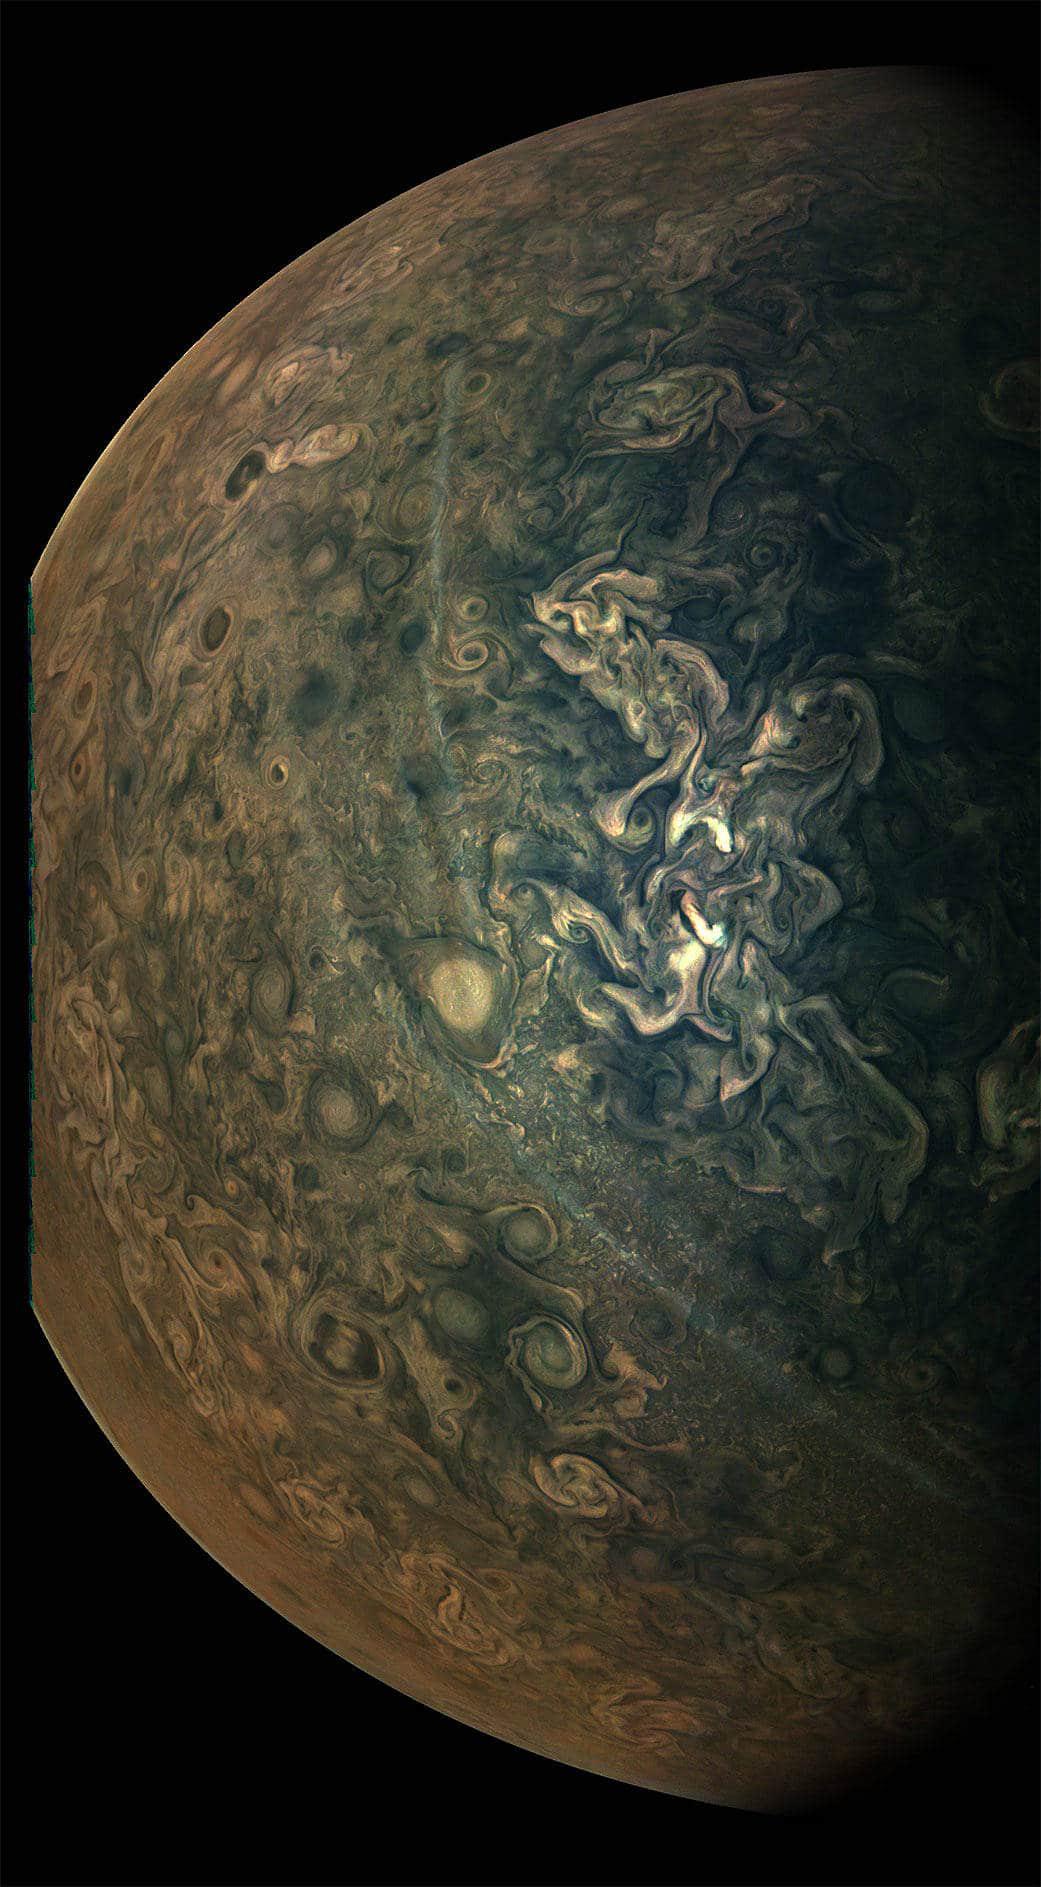 A shot of <a href="https://solarsystem.nasa.gov/planets/jupiter/overview/">Jupiter</a>'s tumultuous northern regions during Juno's close approach to the planet on Feb. 17, 2020. (<a href="https://www.jpl.nasa.gov/spaceimages/details.php?id=PIA23802">NASA/JPL/SwRI/MSSS; Image processing by Gerald Eichstädt</a>)